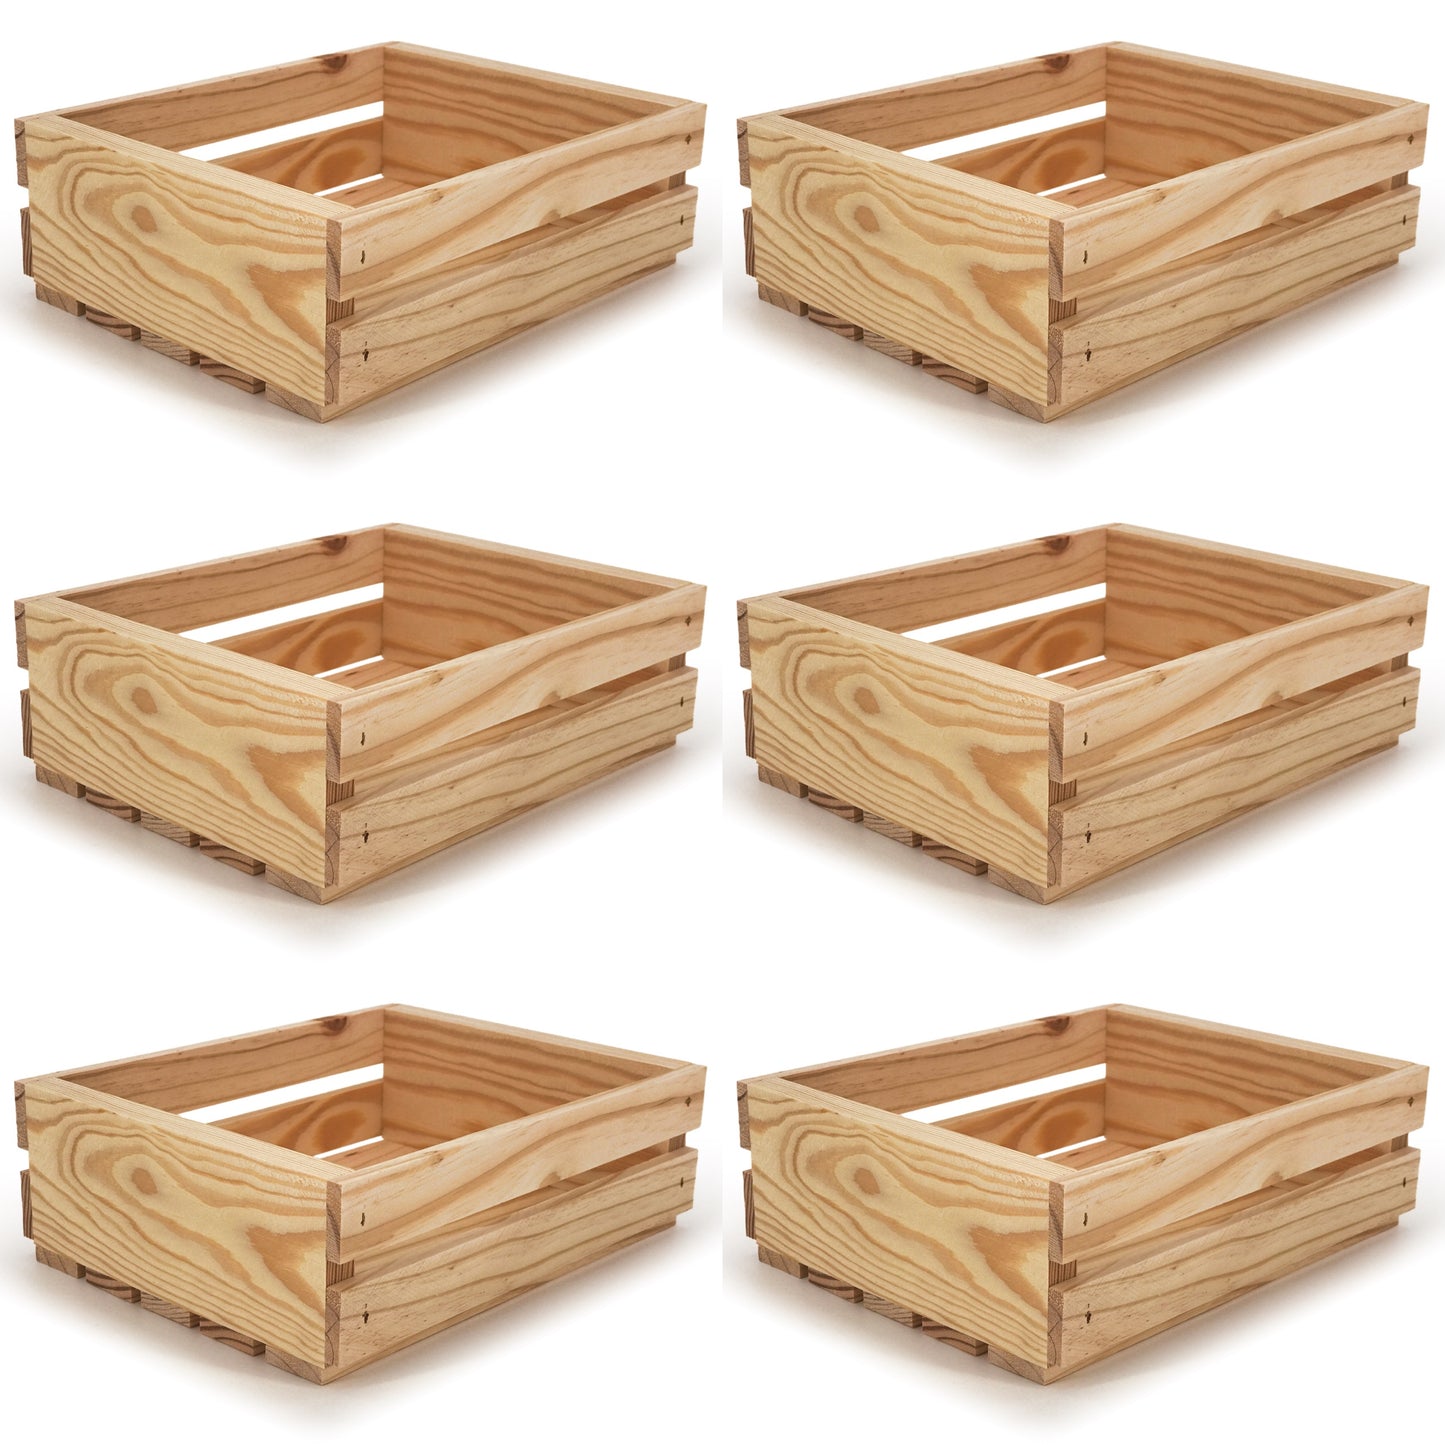 6 small wooden crates 10x8